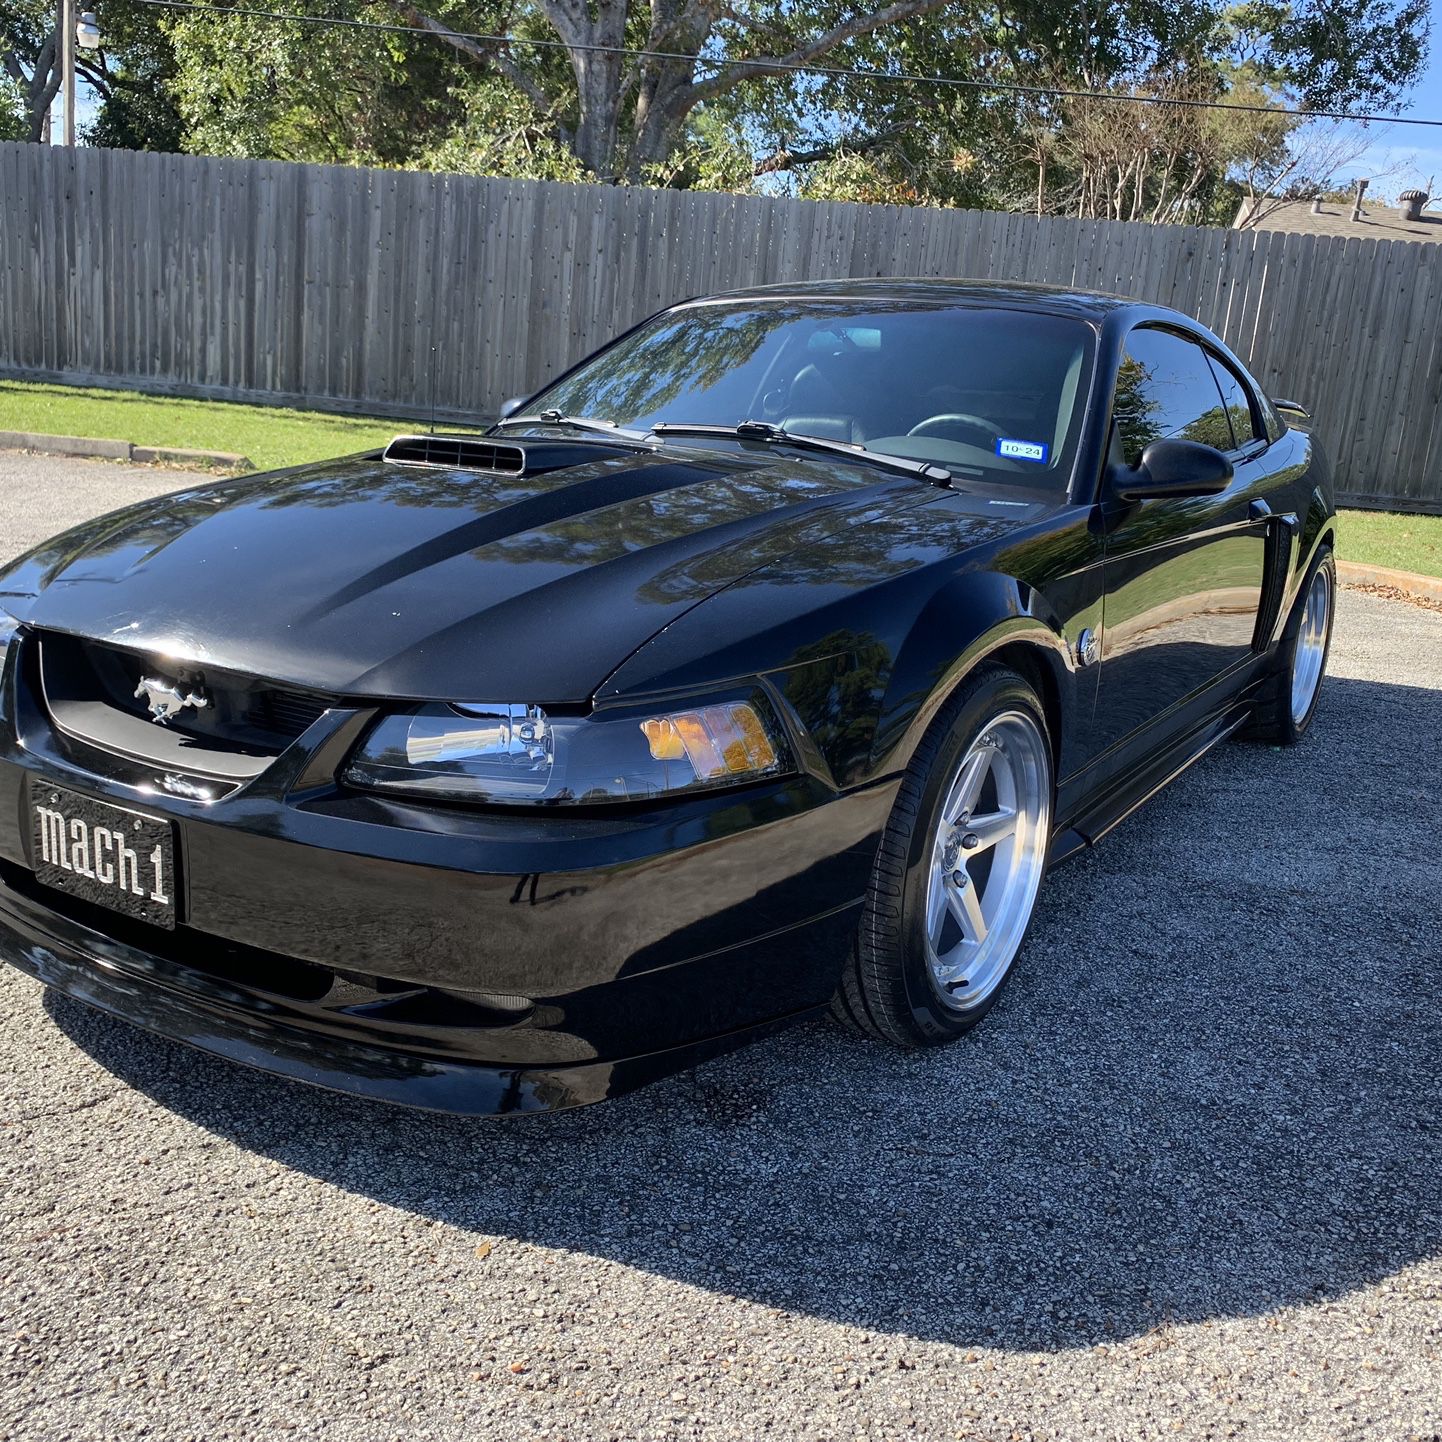 2004 Mach 1 Supercharge 